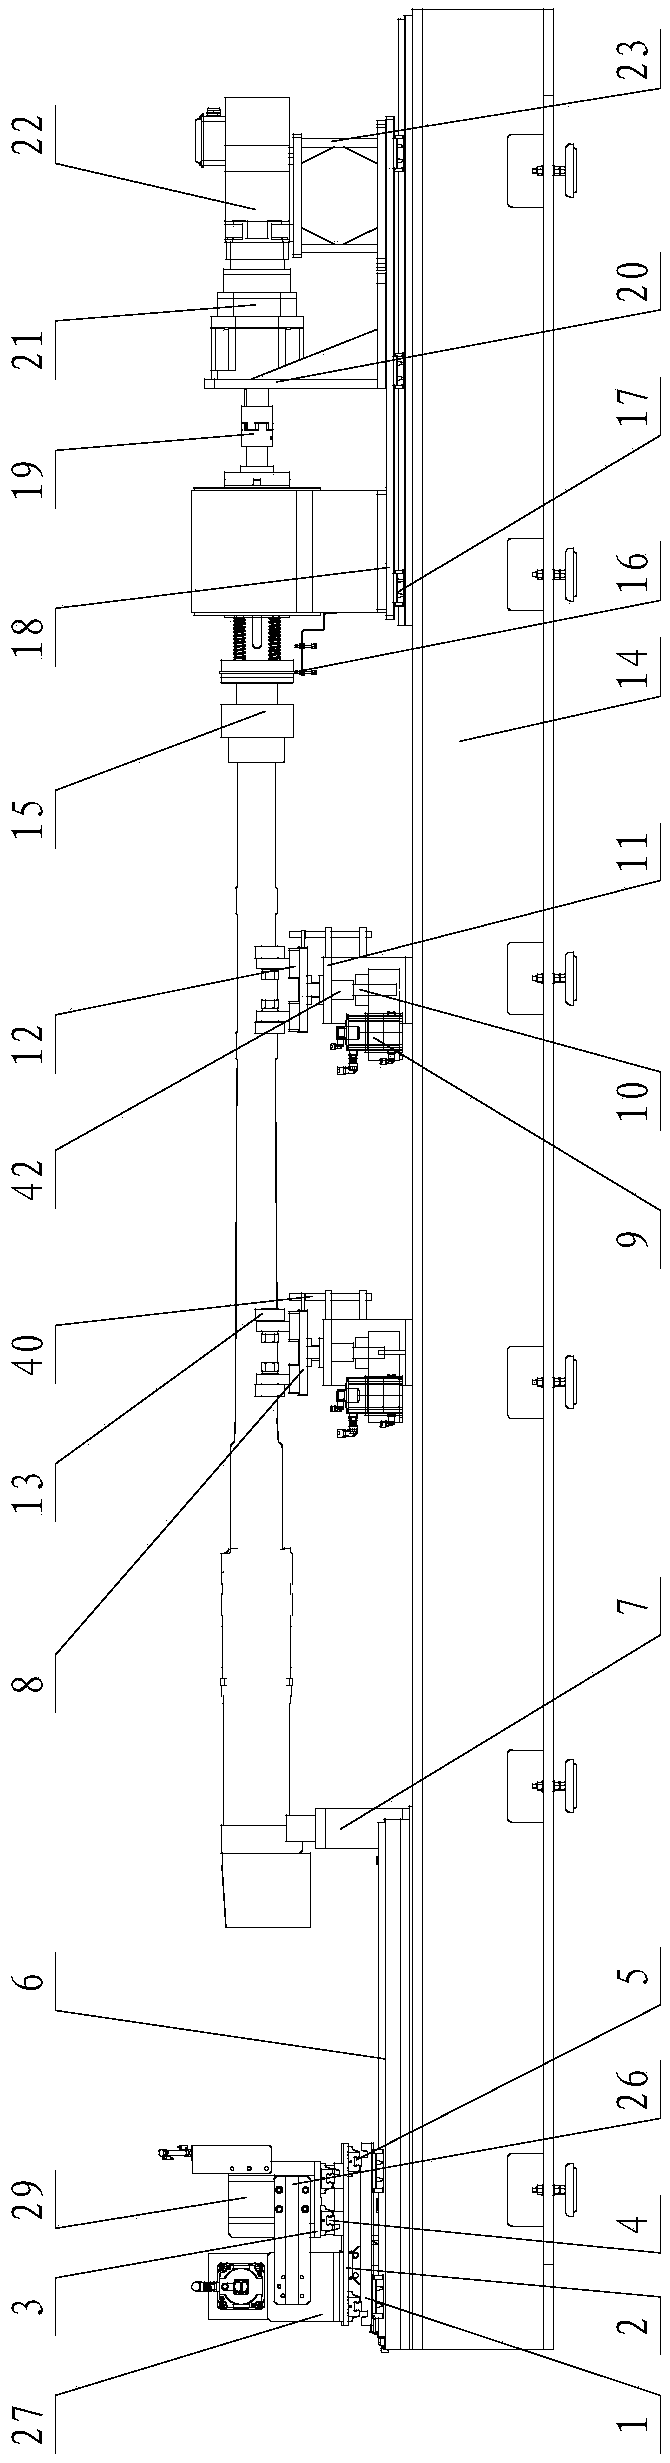 Pipe-fitting-like threaded screwing mechanism for heavy-weight and large length-diameter ratio